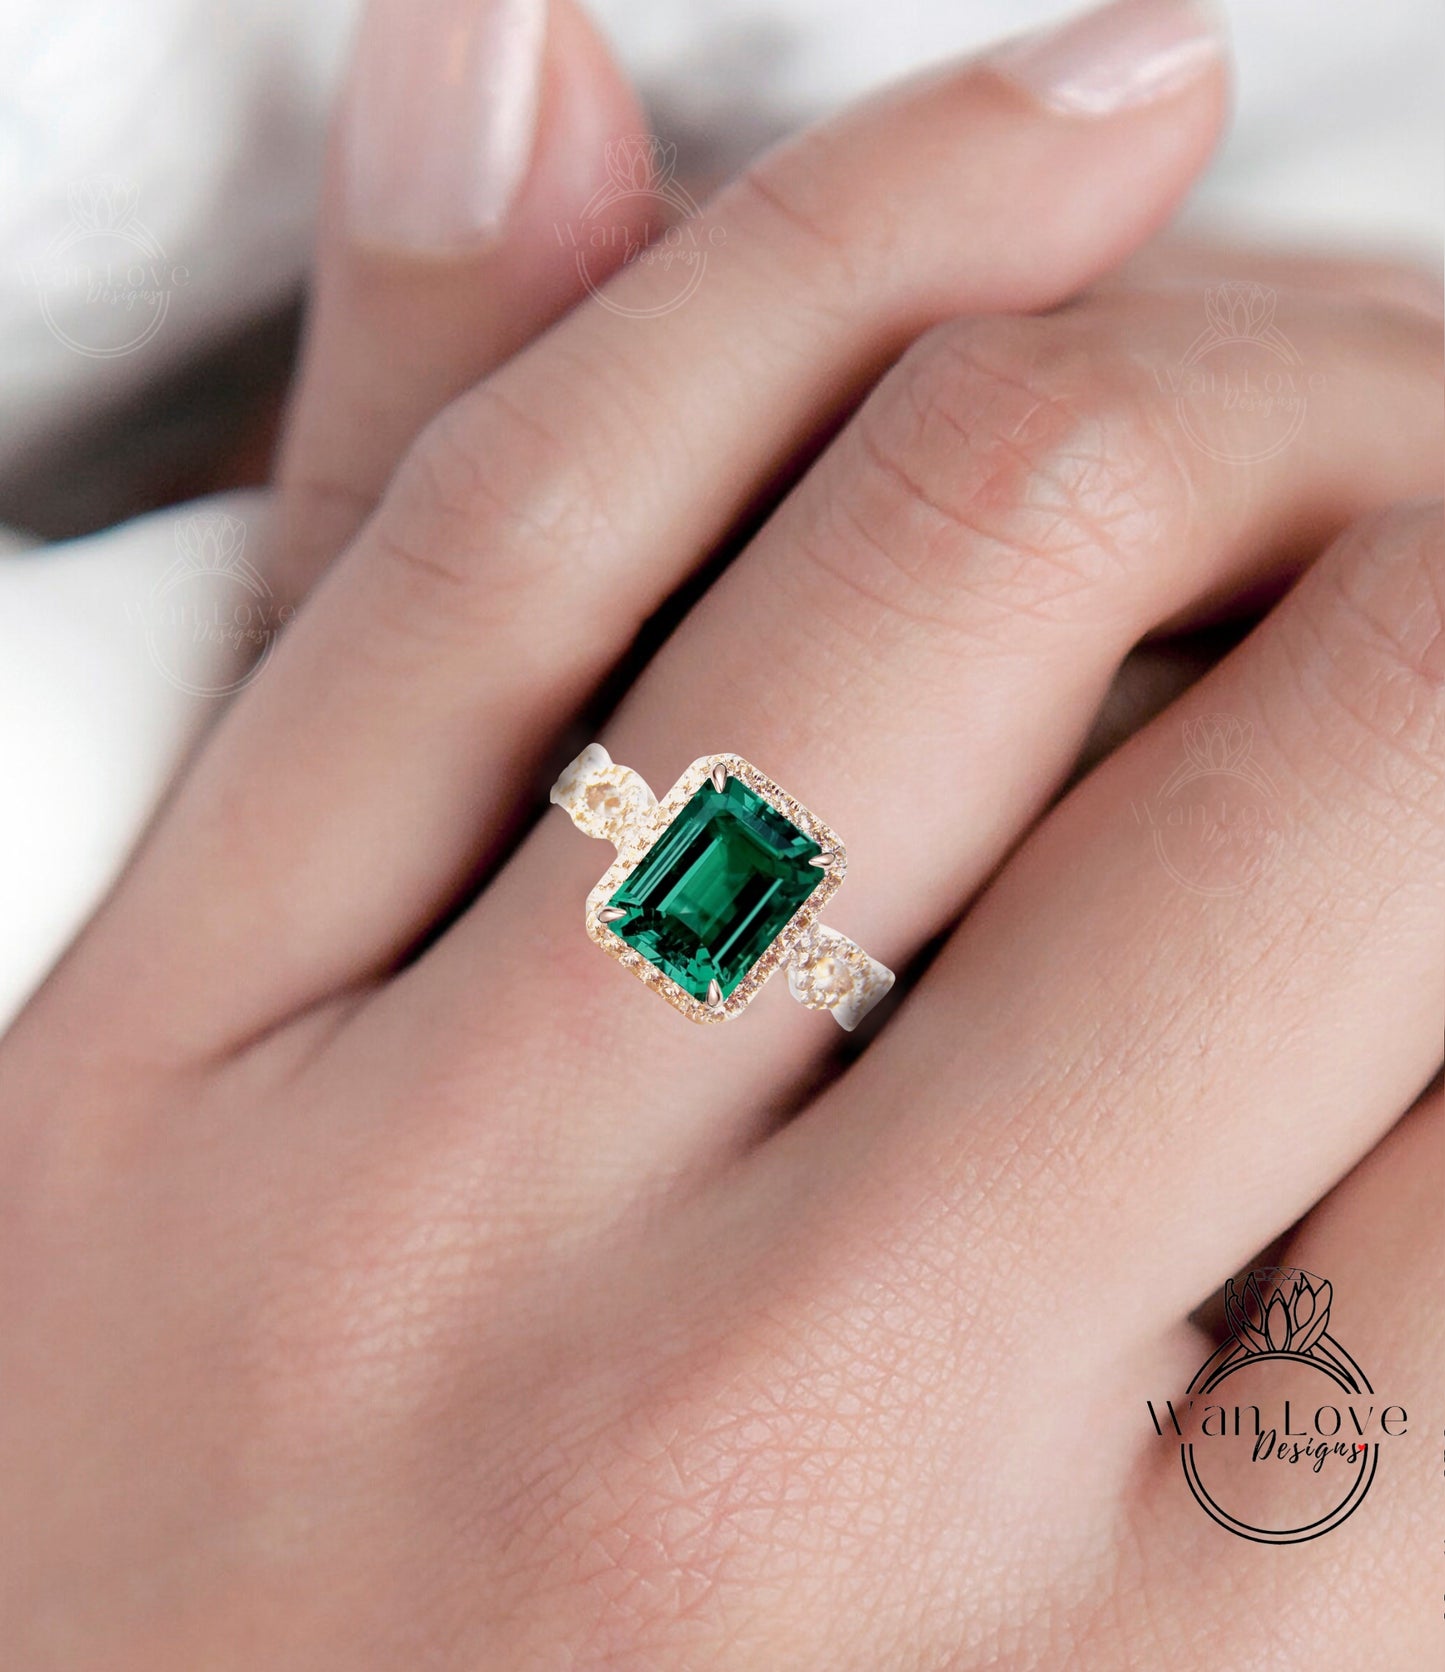 Emerald Ring, Emerald Cut Diamond Halo Ring, Twisted Split Shank Band Accents 14k White Gold Wedding Engagement Ring, Pave Set Ring